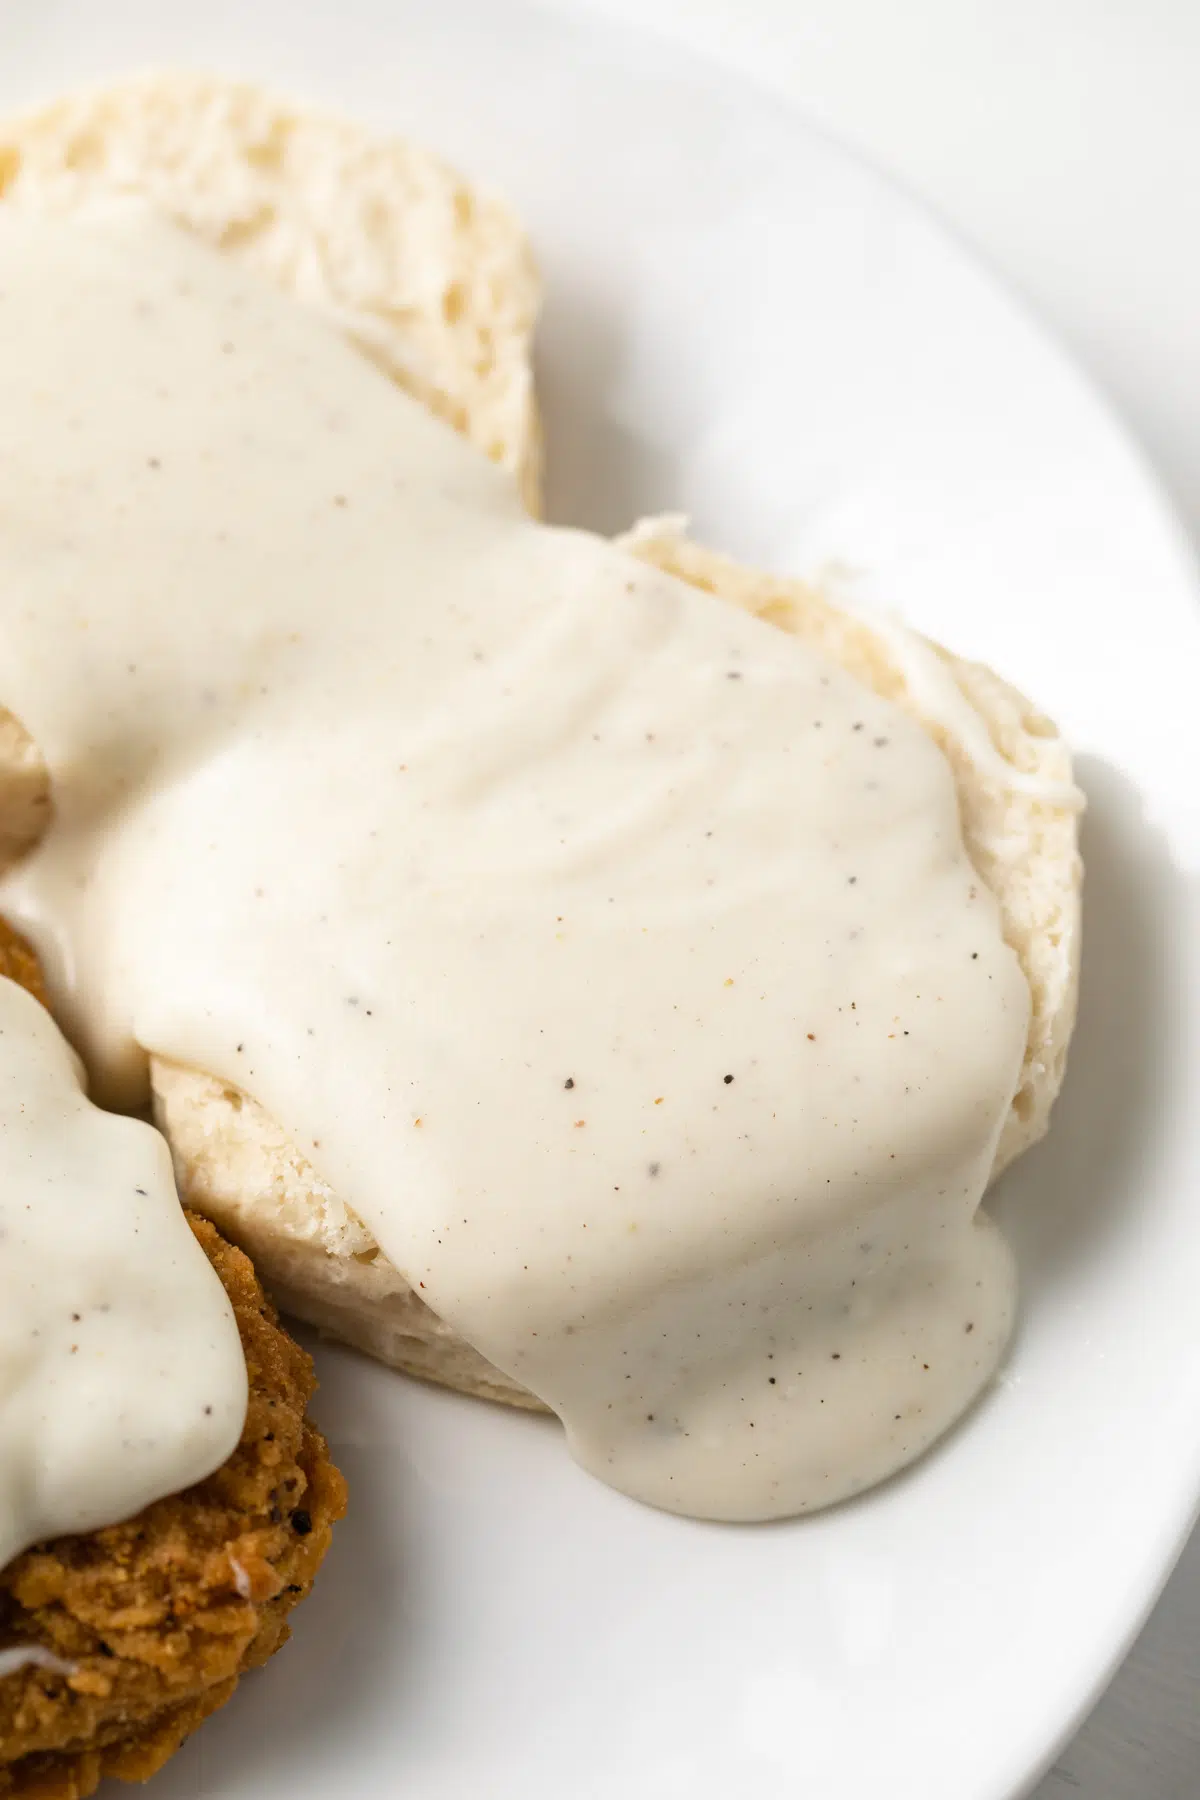 Country white gravy over biscuits.